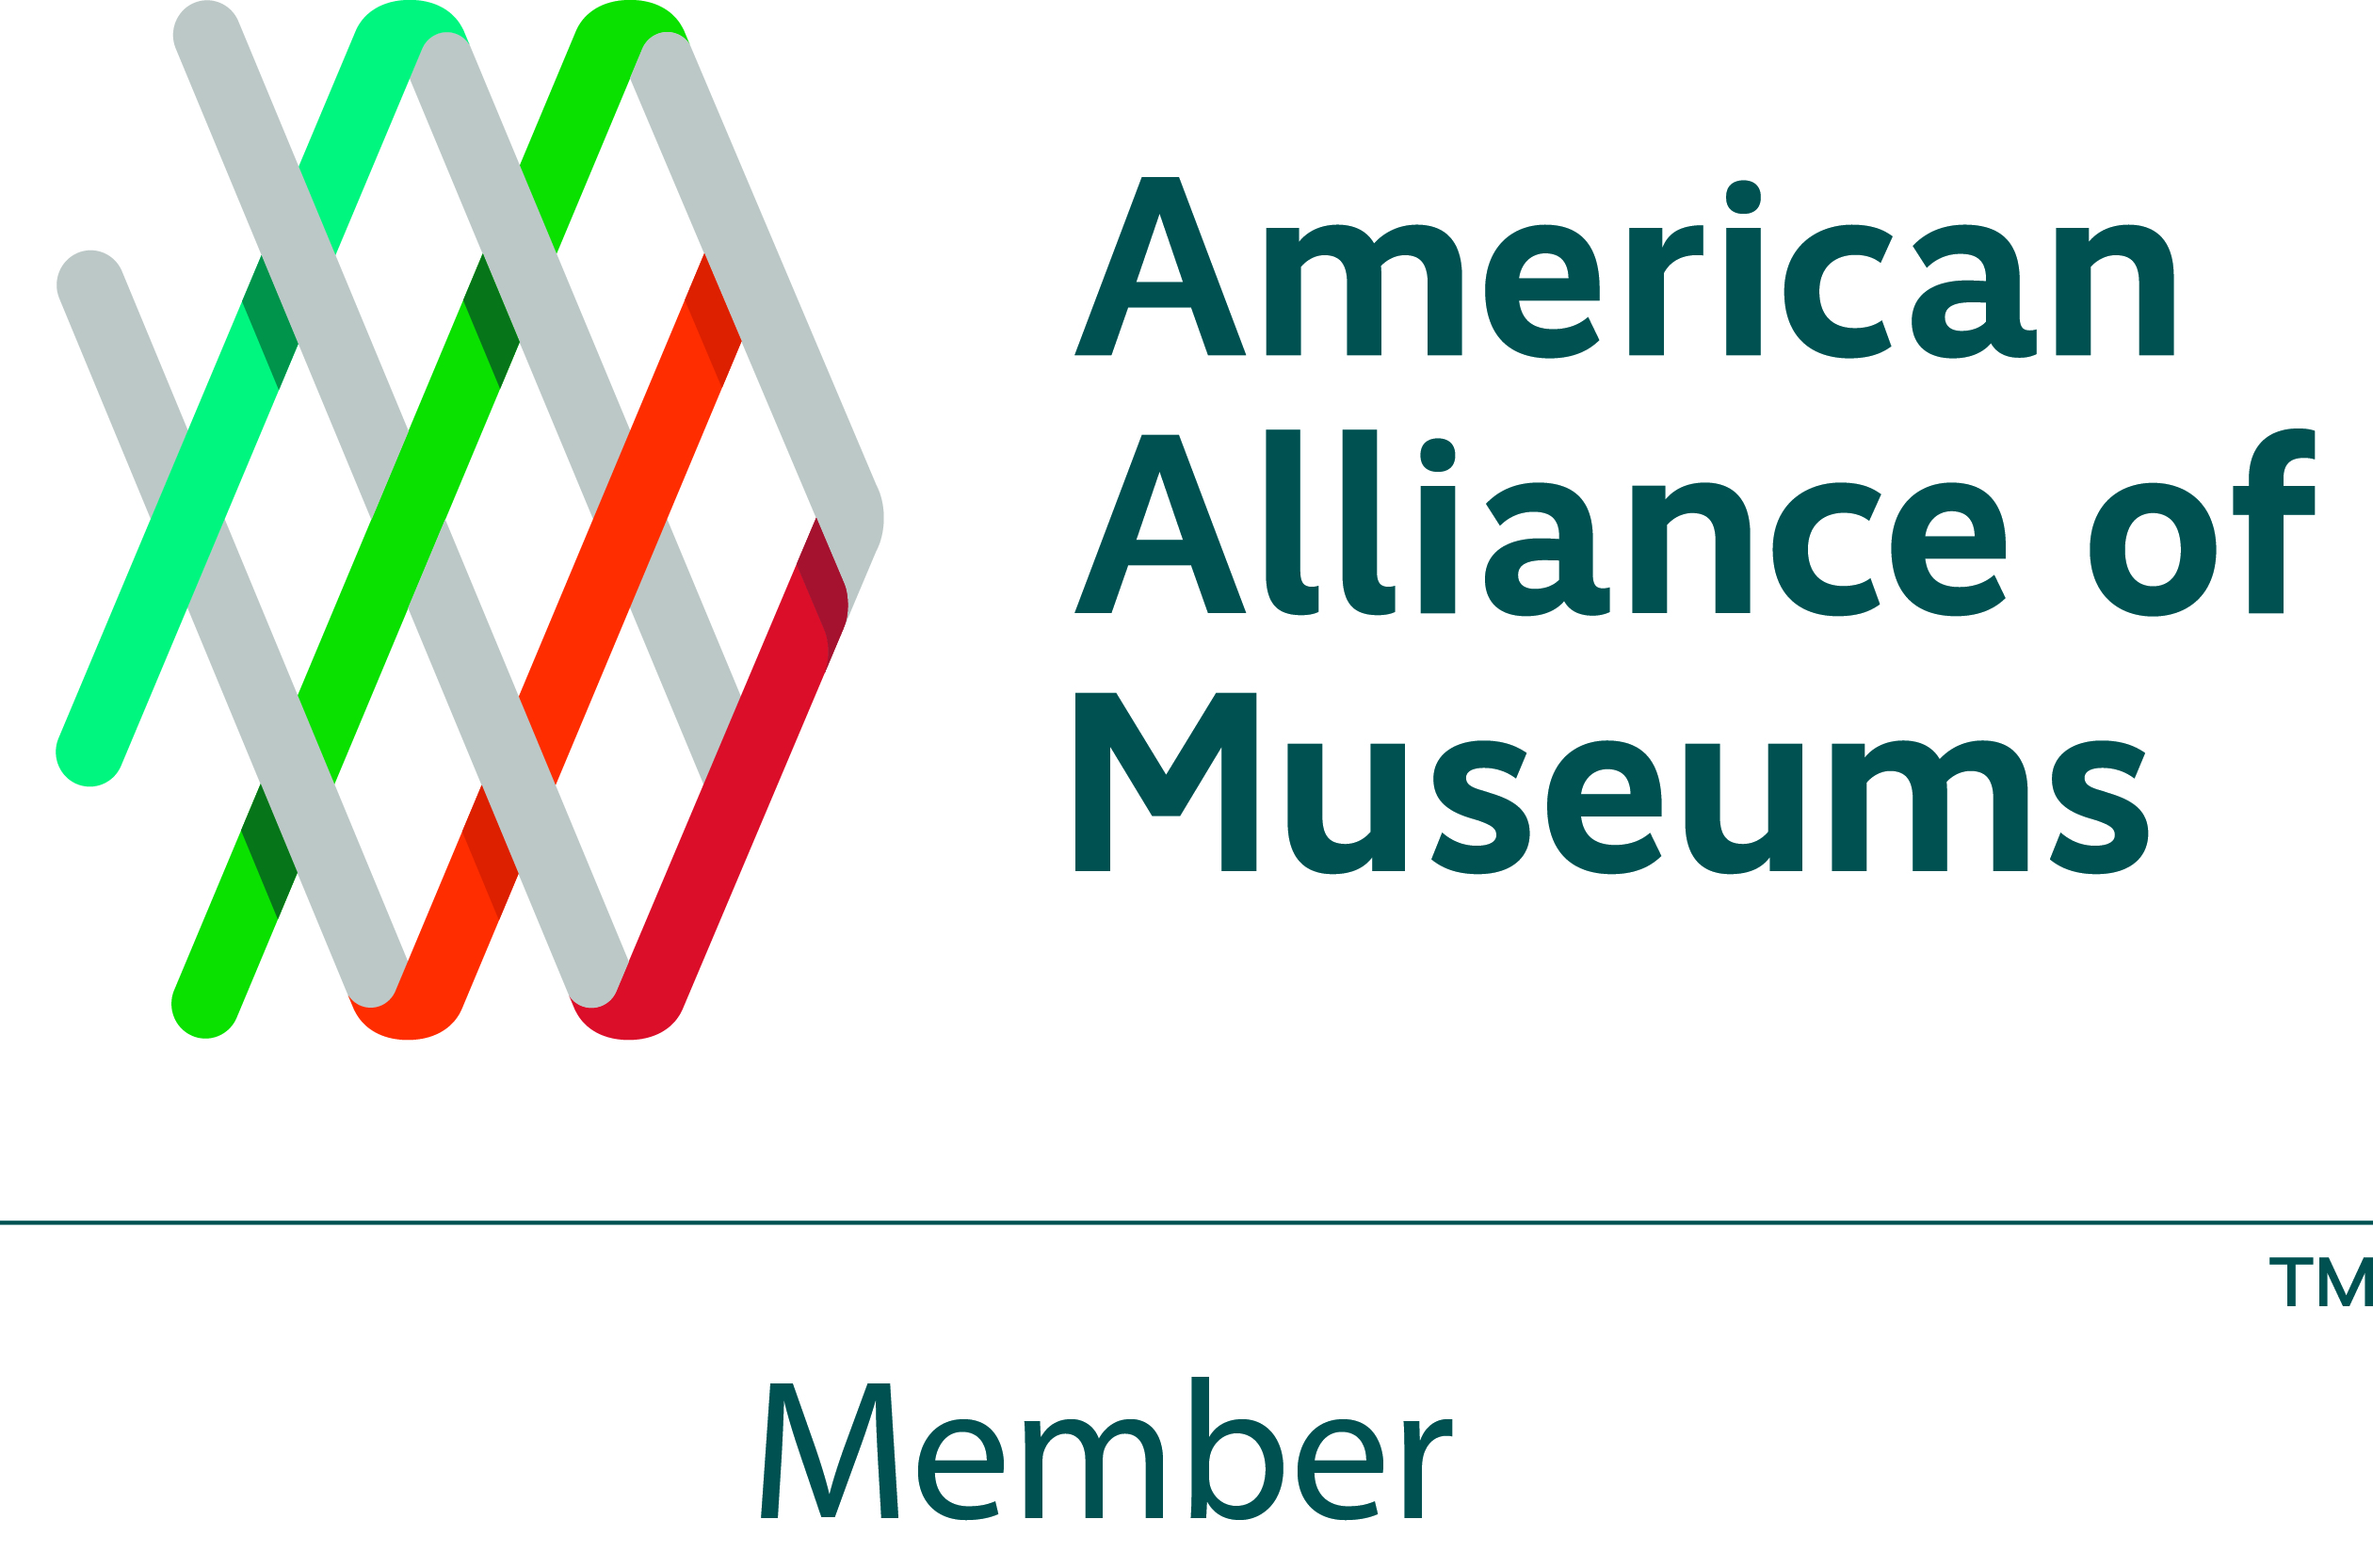 American Alliance of Museums image